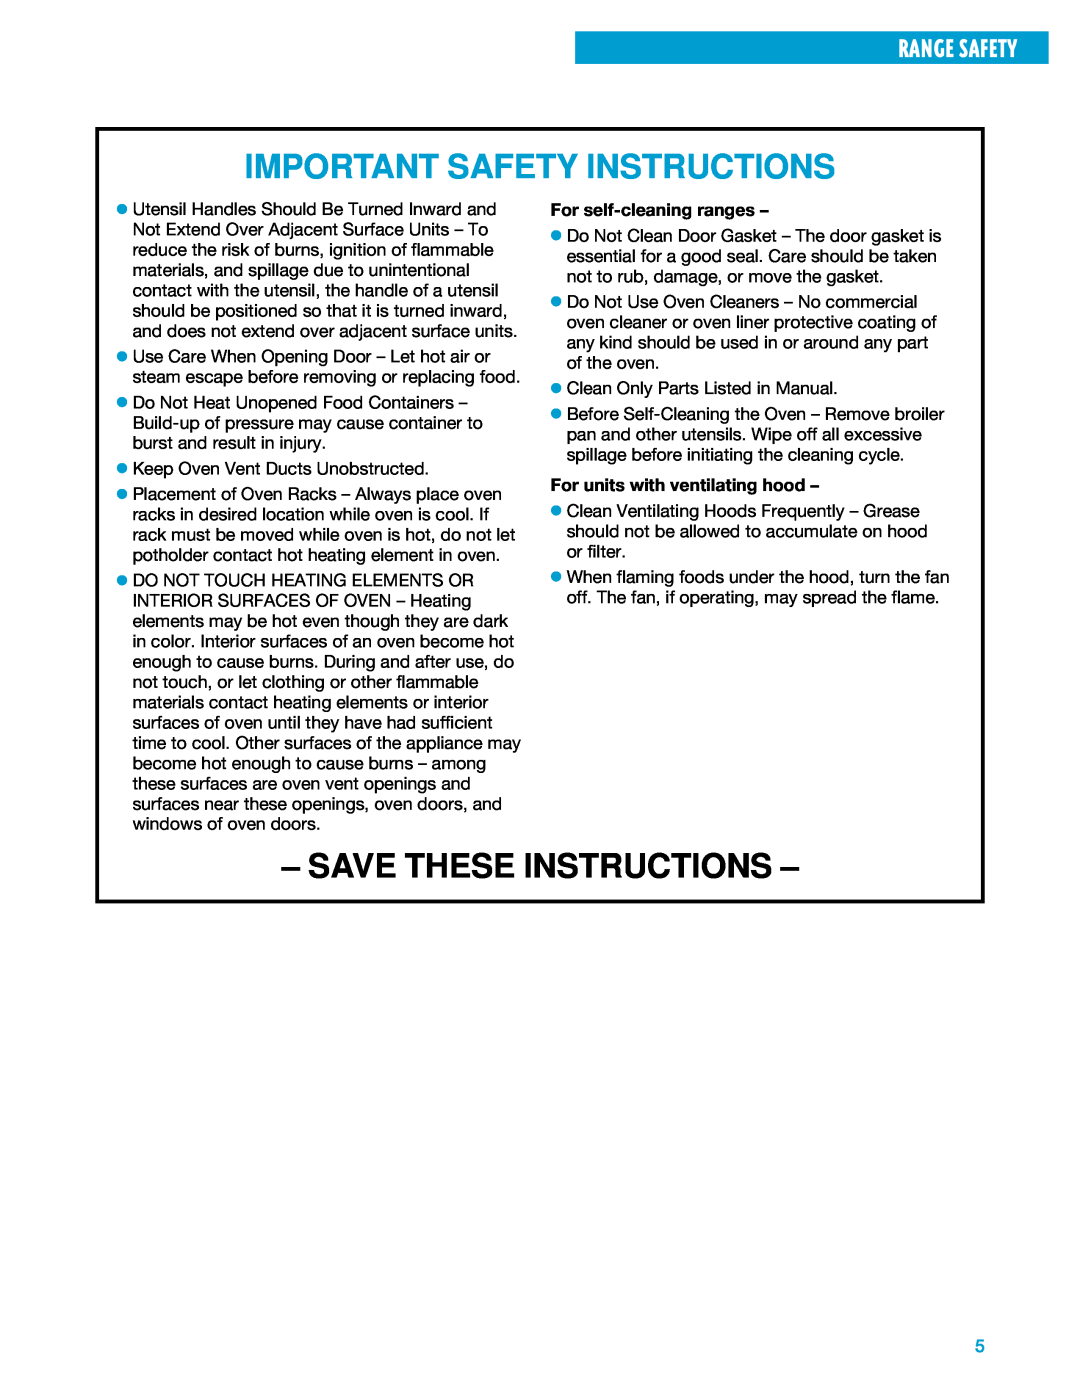 Whirlpool SF375PEE warranty Important Safety Instructions, Save These Instructions, Range Safety, For self-cleaning ranges 